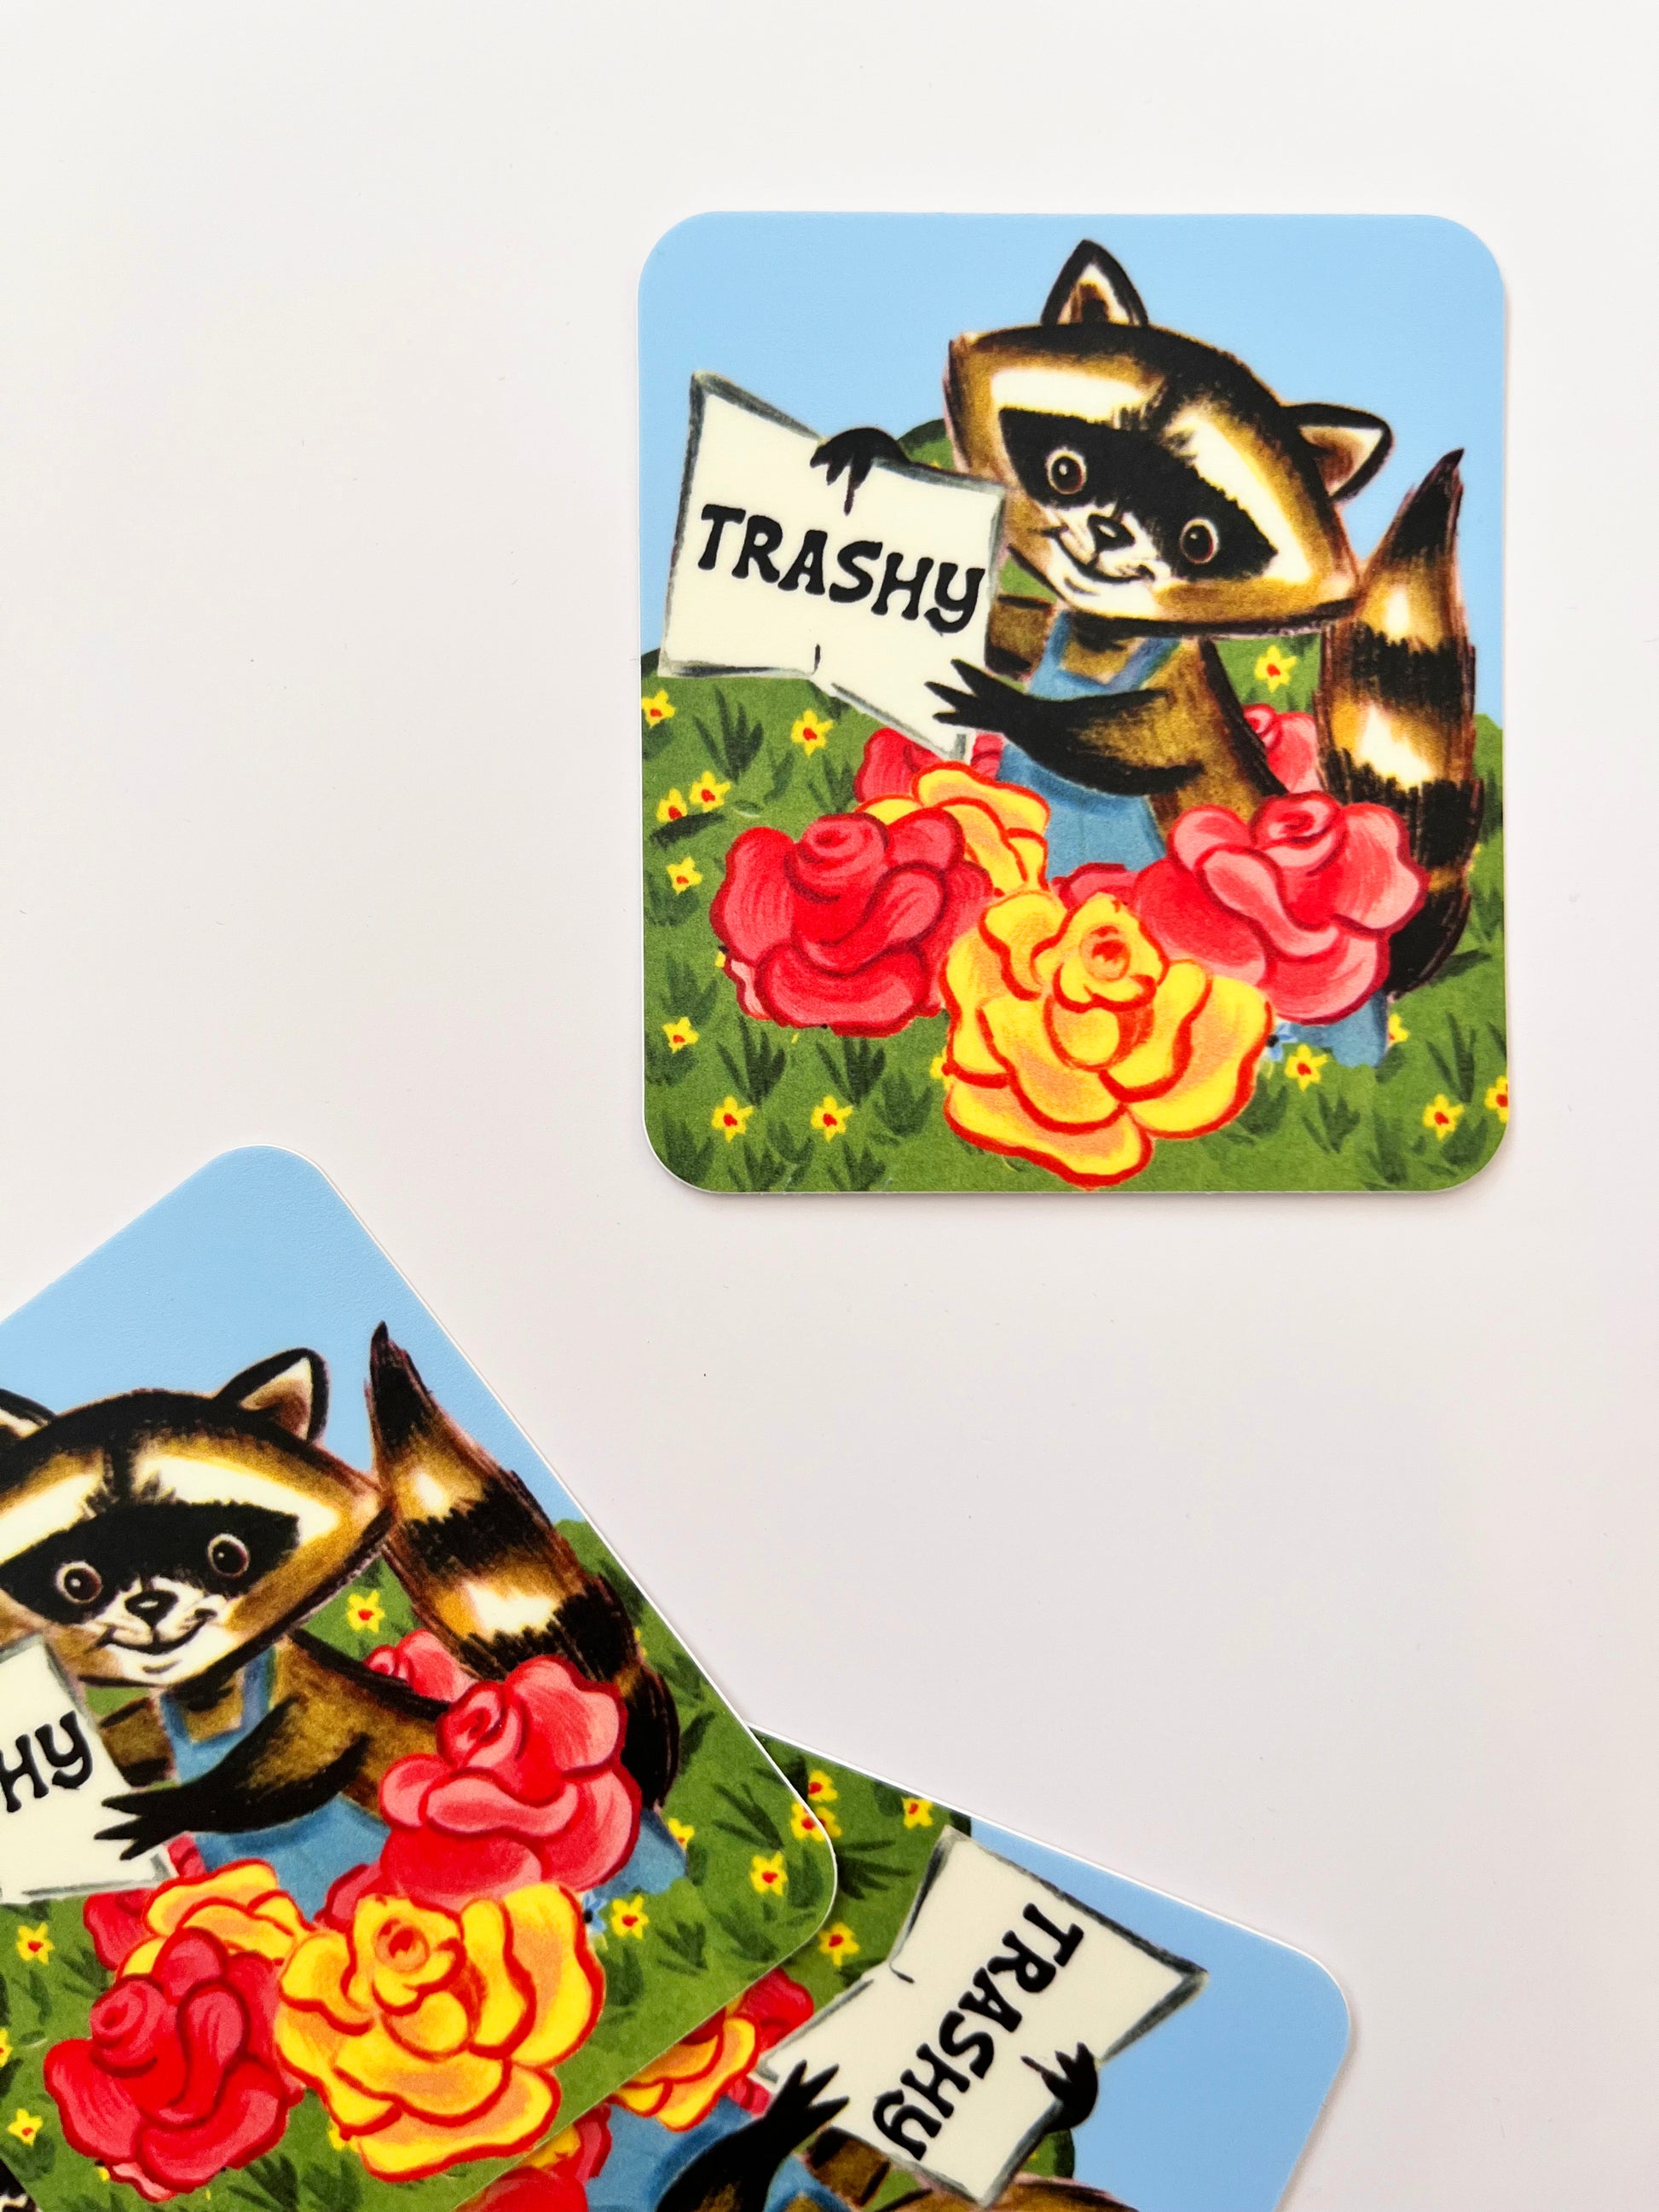 funny raccoon sticker trashy outdoor scene pink yellow flowers blue sky sarcastic stickers coin laundry montana 